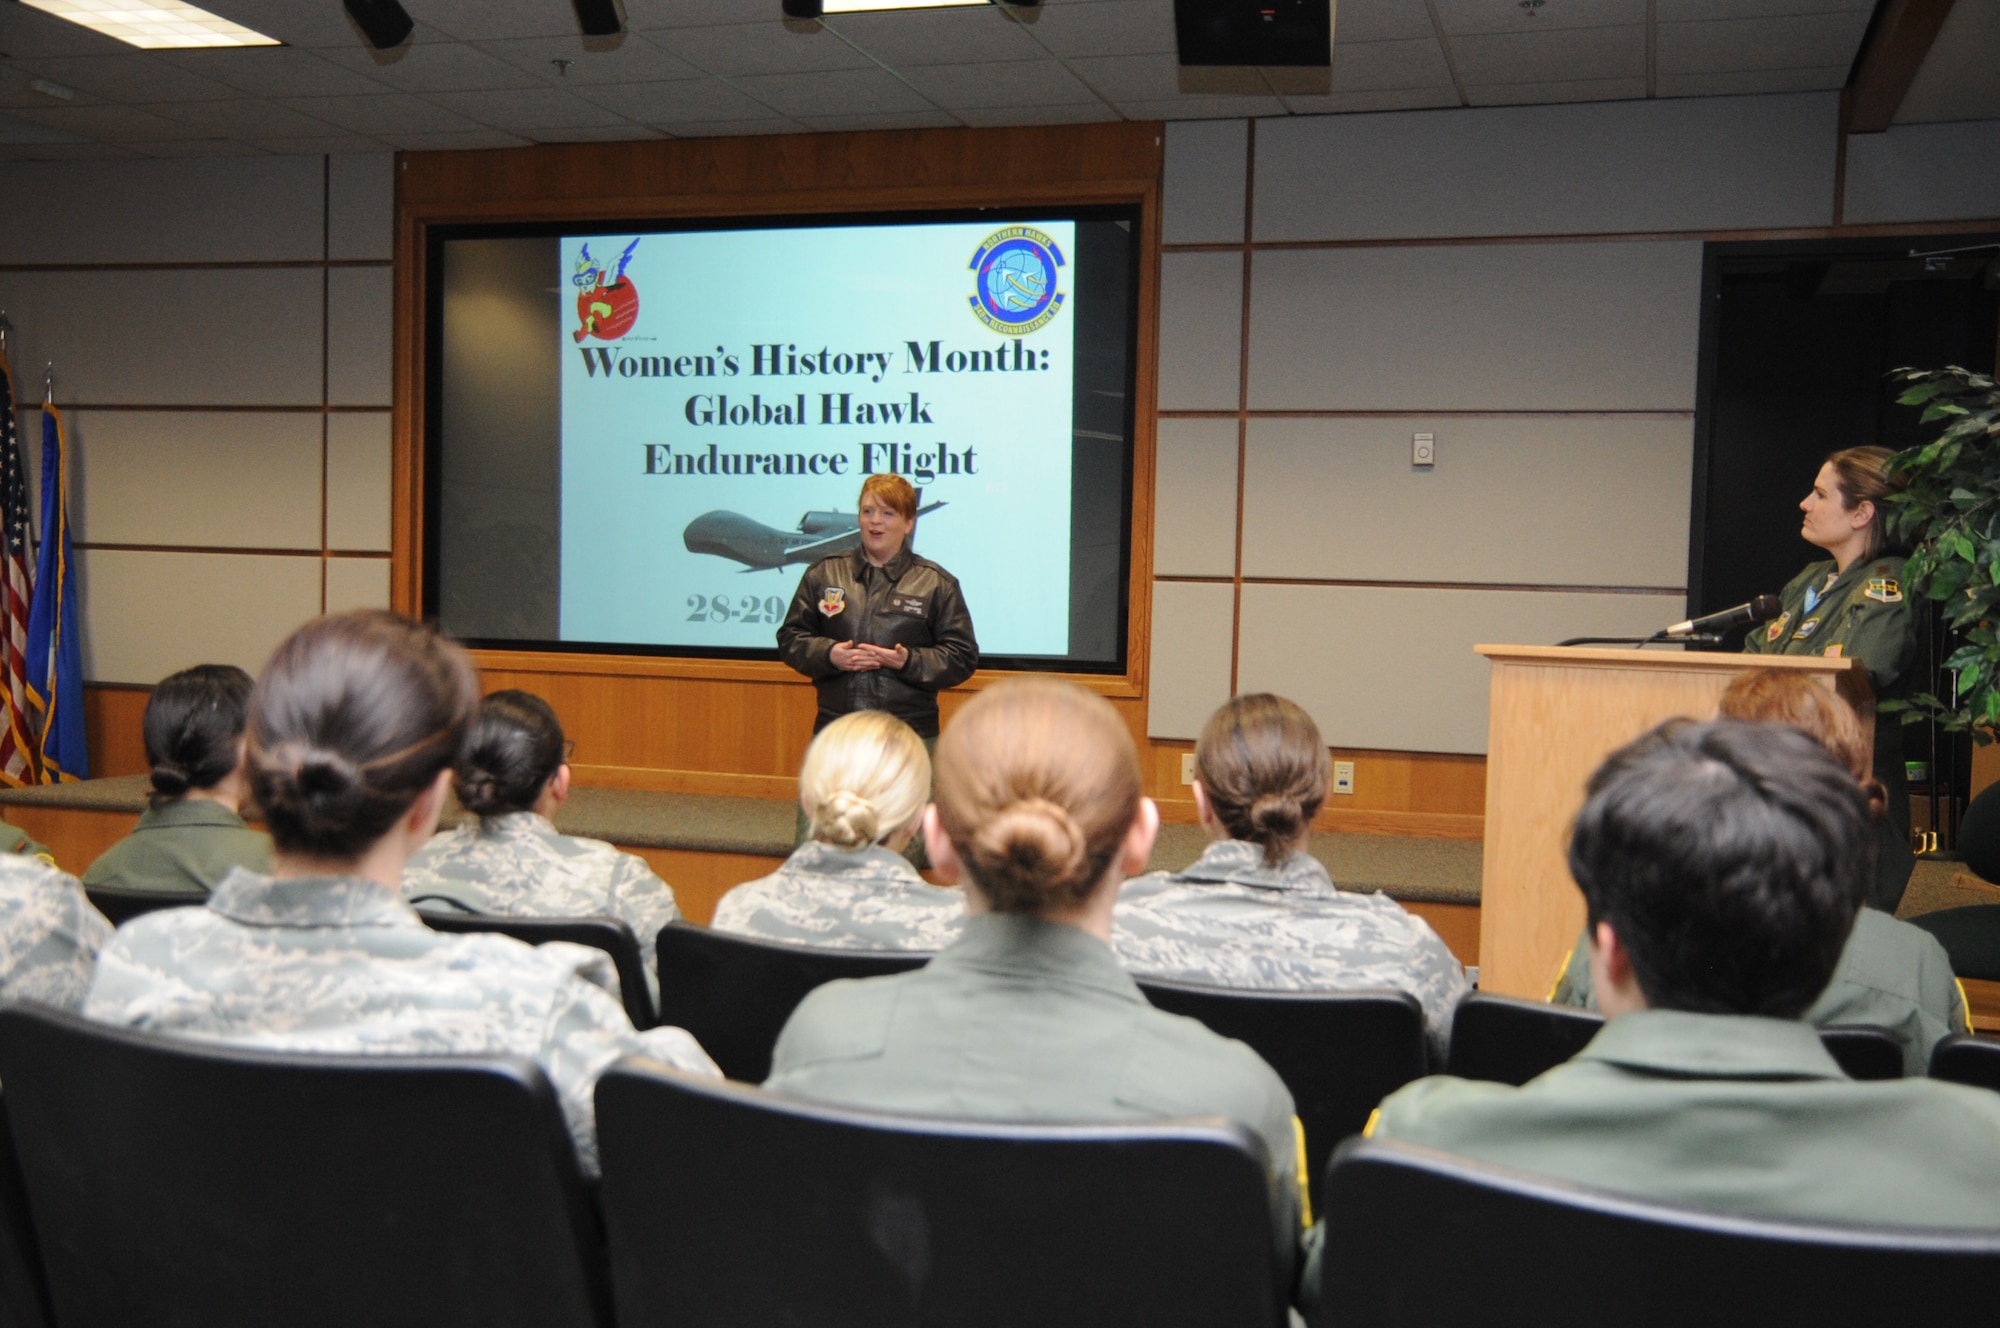 Lt. Col. Amanda Brandt, 348th Reconnaissance Squadron commander, speaks to women of the 348th RS and 319th Air Base Wing during a pre-mission brief March 27, 2014, on Grand Forks Air Force Base, N.D. The mission was for an endurance flight of the RQ-4 Global Hawk to be manned entirely by female Airmen. (U.S. Air Force photo/Staff Sgt. David Dobrydney)